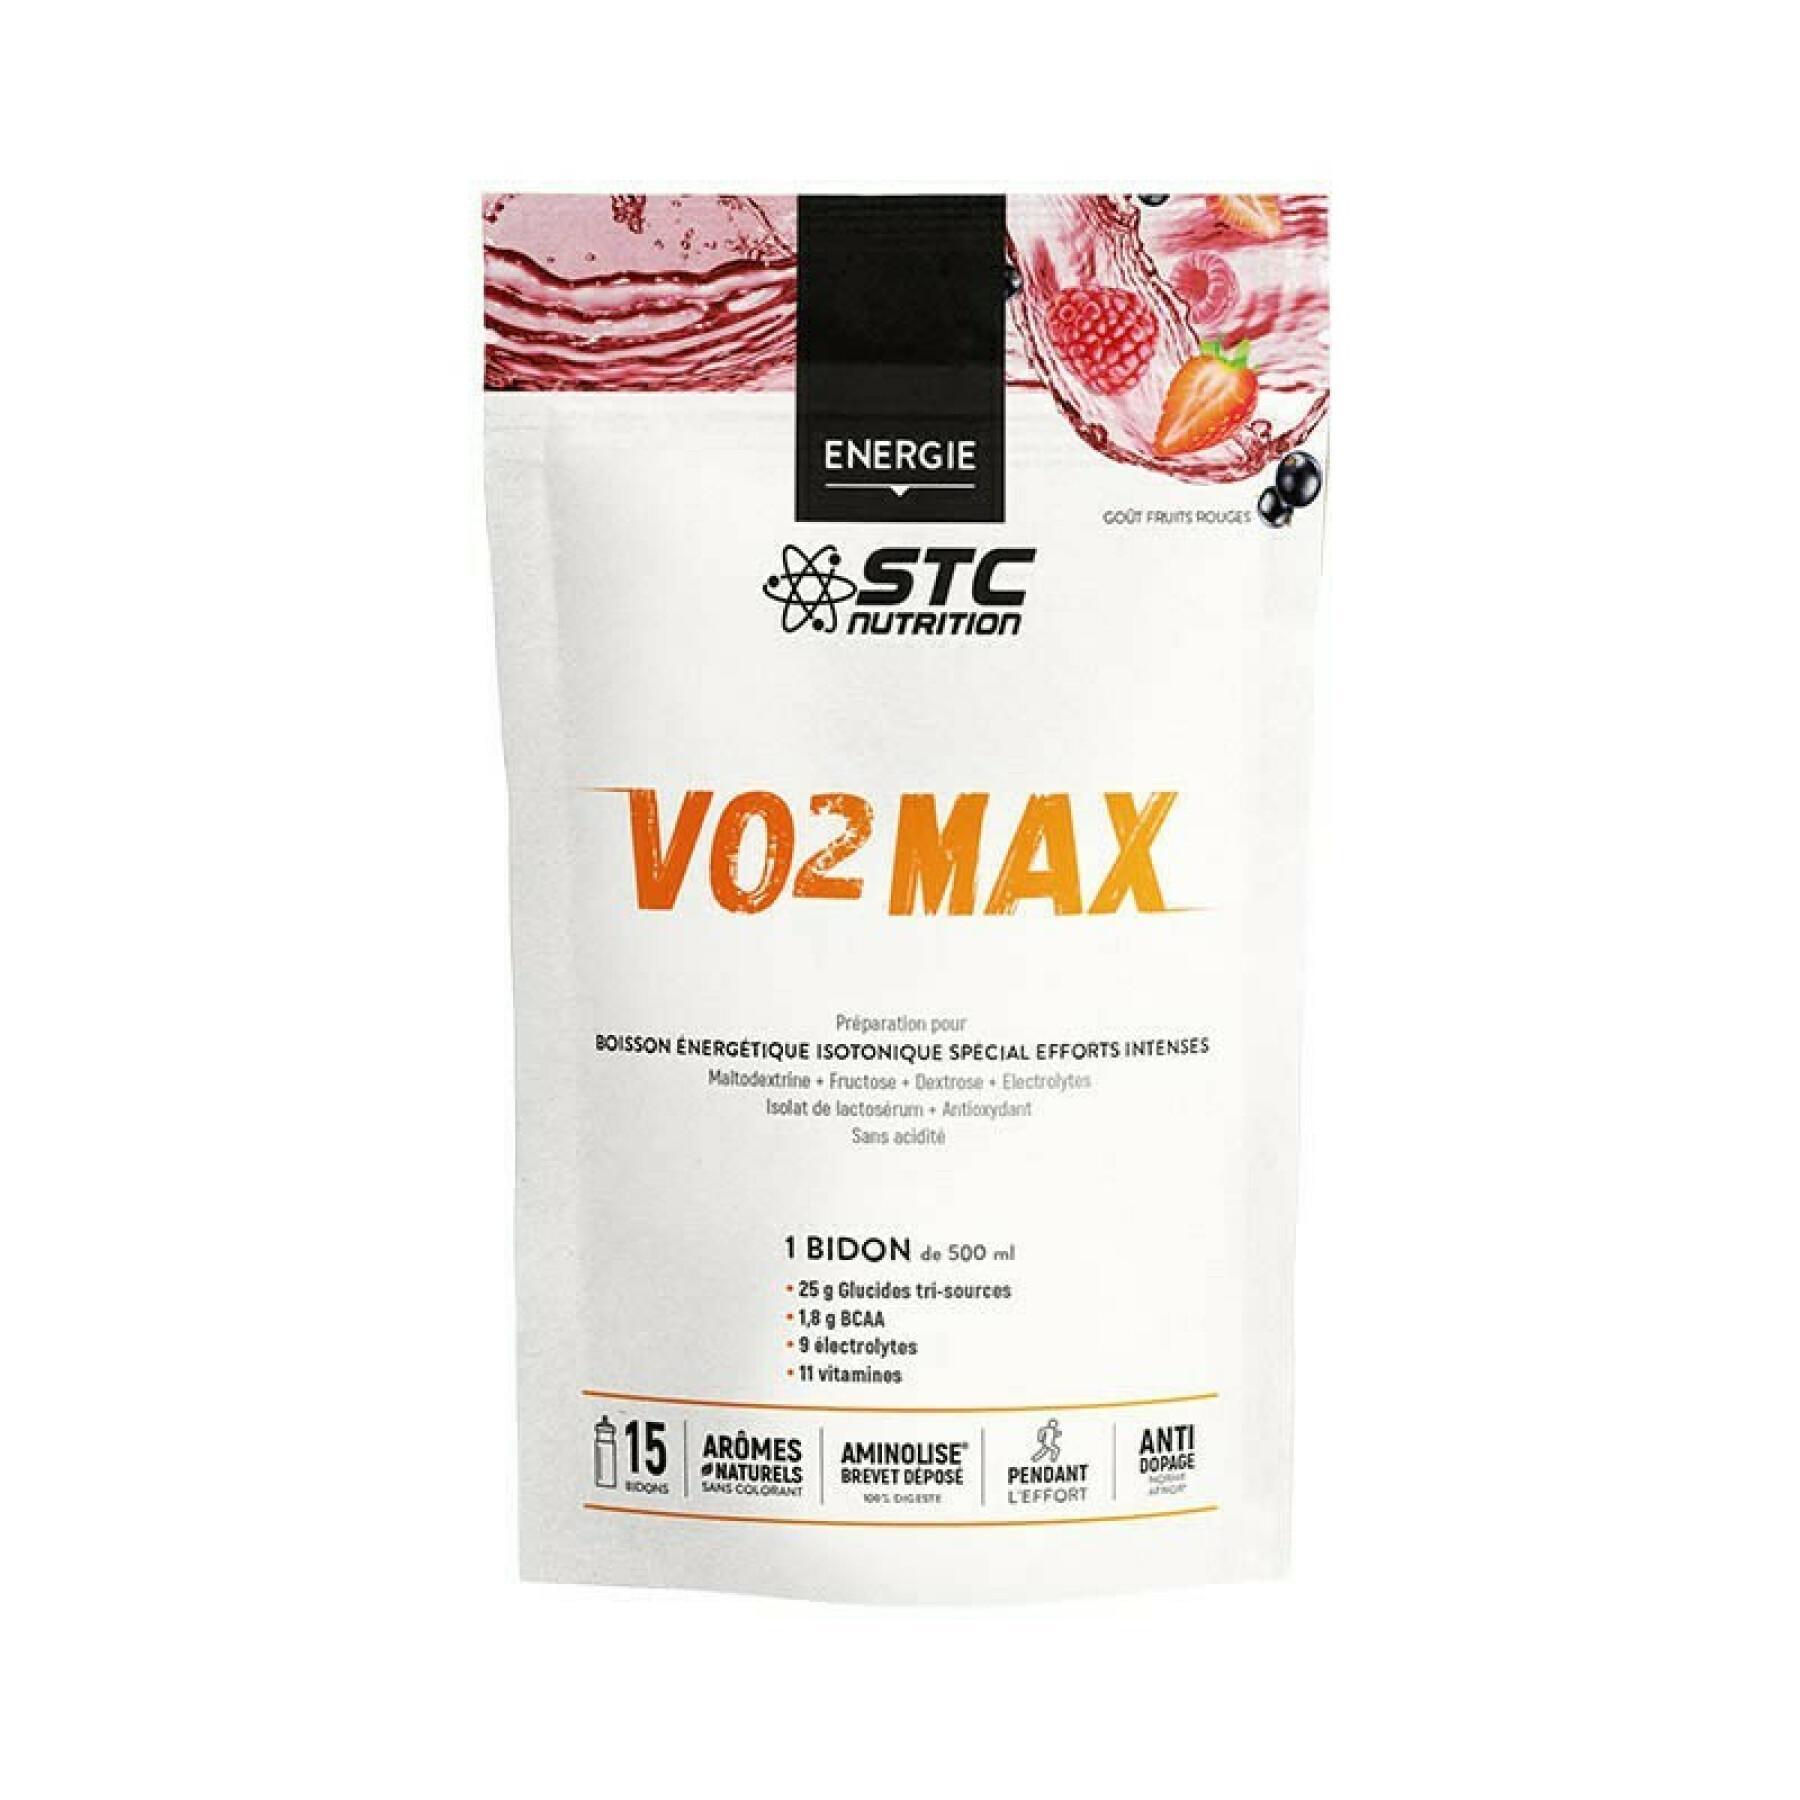 Doypack nutrition vo2 max® met maatlepel STC Nutrition - fruits rouges - 525 g